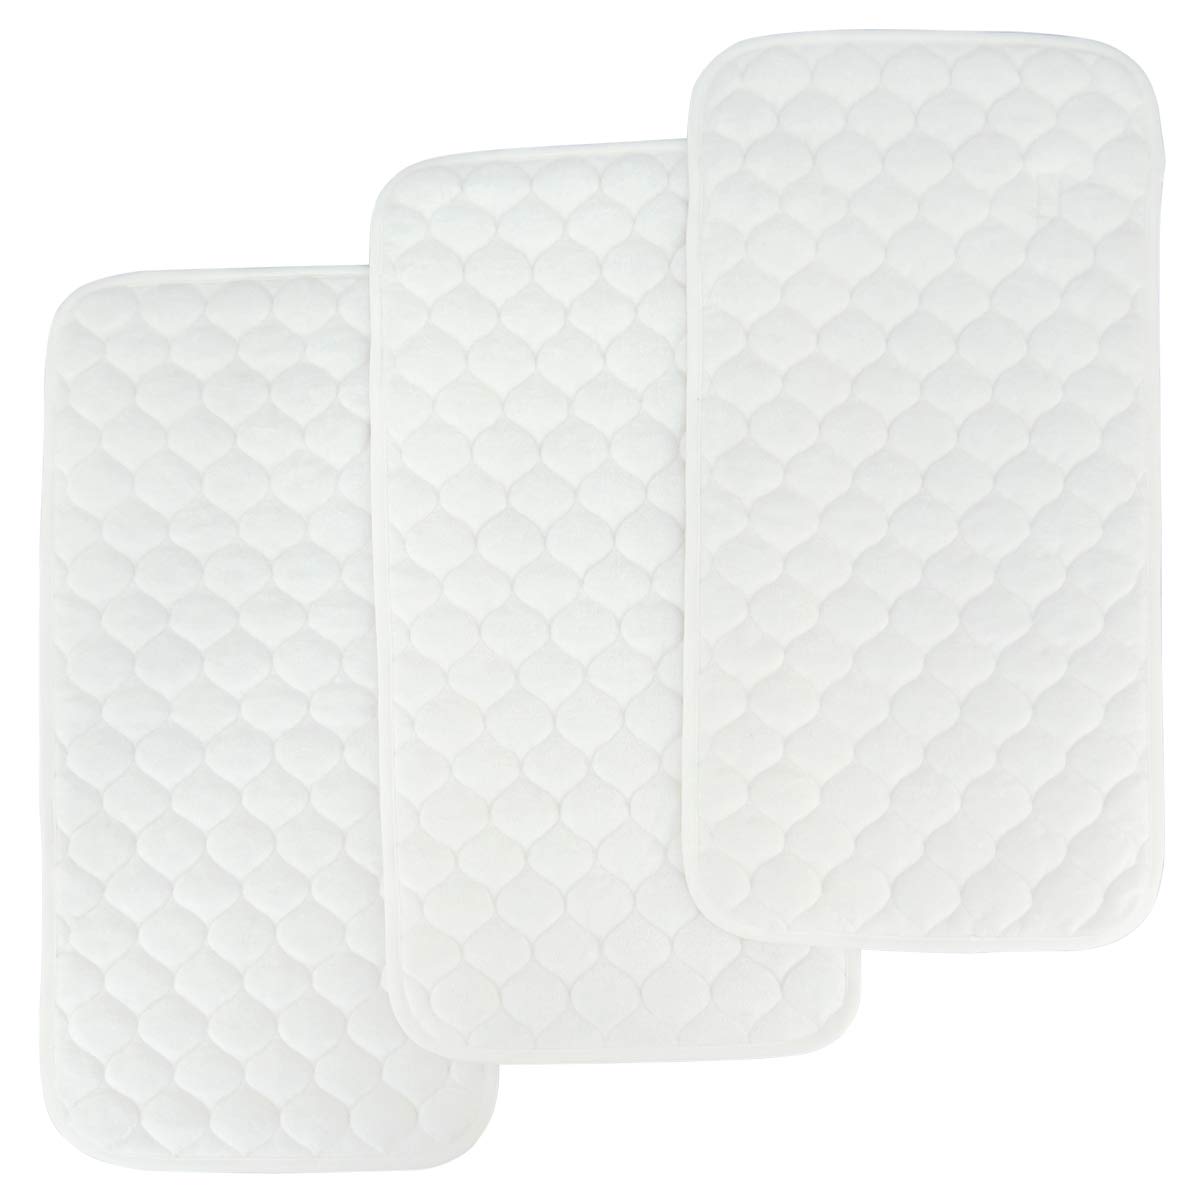 White Bamboo Quilted Thicker Longer Waterproof Changing Pad Liners for Babies 3 Count by Oleh-Oleh